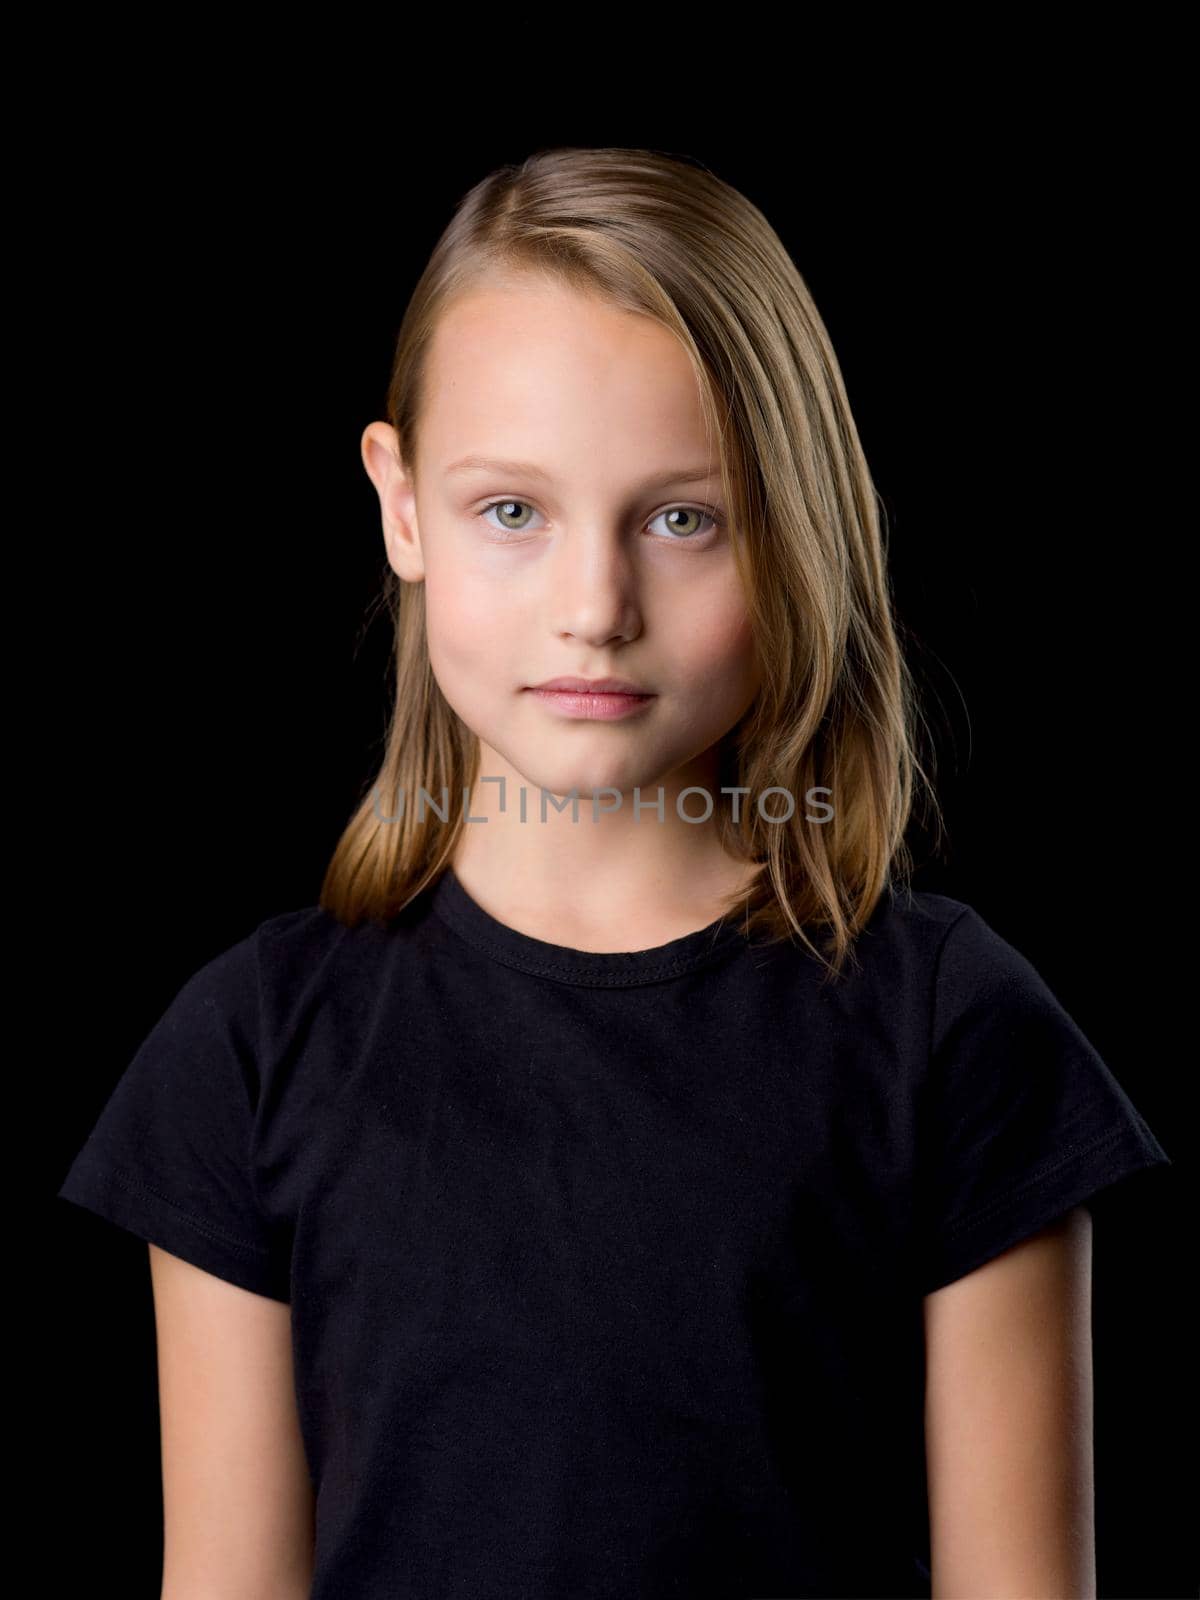 Beautiful girl posing in the studio. Close-up portrait of a beautiful blonde teenage girl in a black t-shirt on a black background.